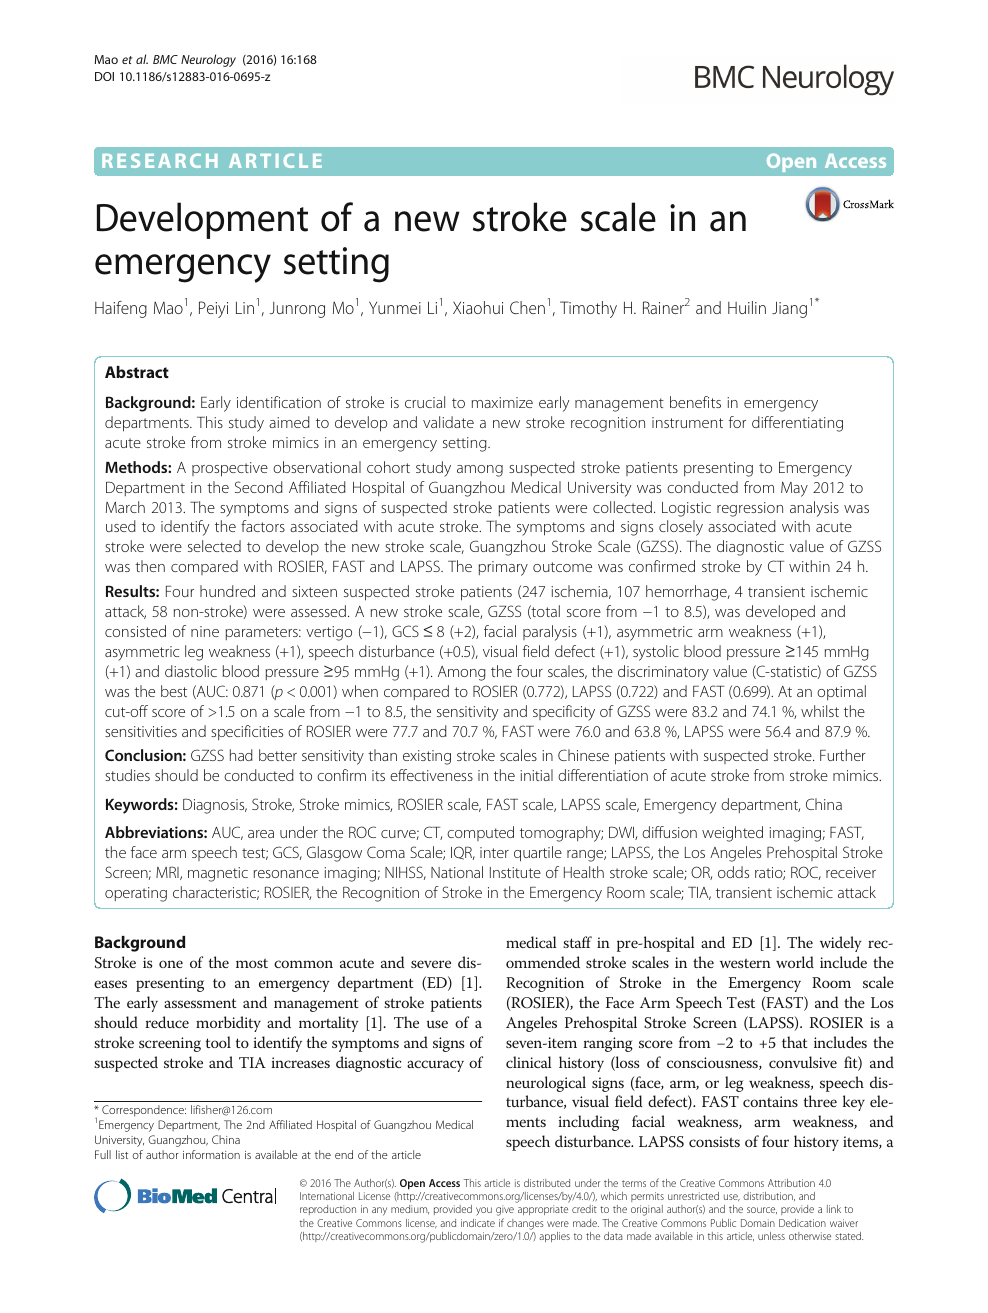 Design and Validation of a Prehospital Stroke Scale to Predict